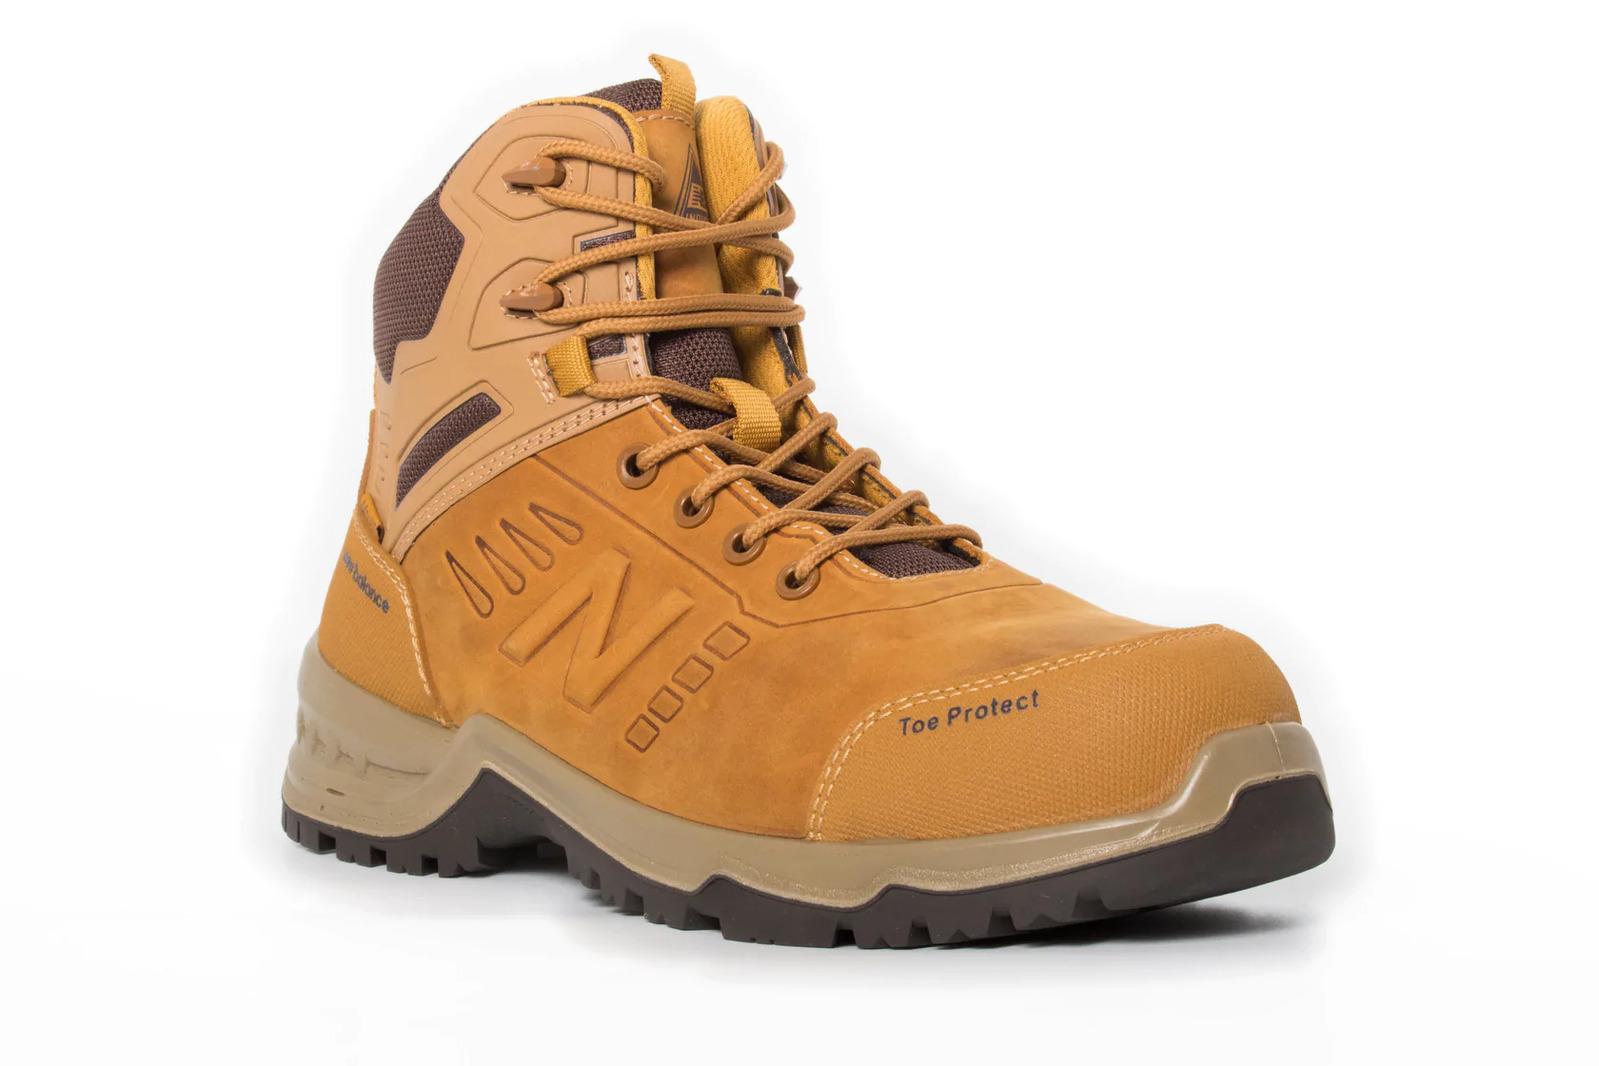 New Balance Mens Contour Steel Toe Cap Safety Work Boots with Zip - Wheat - US 9 Width:2E